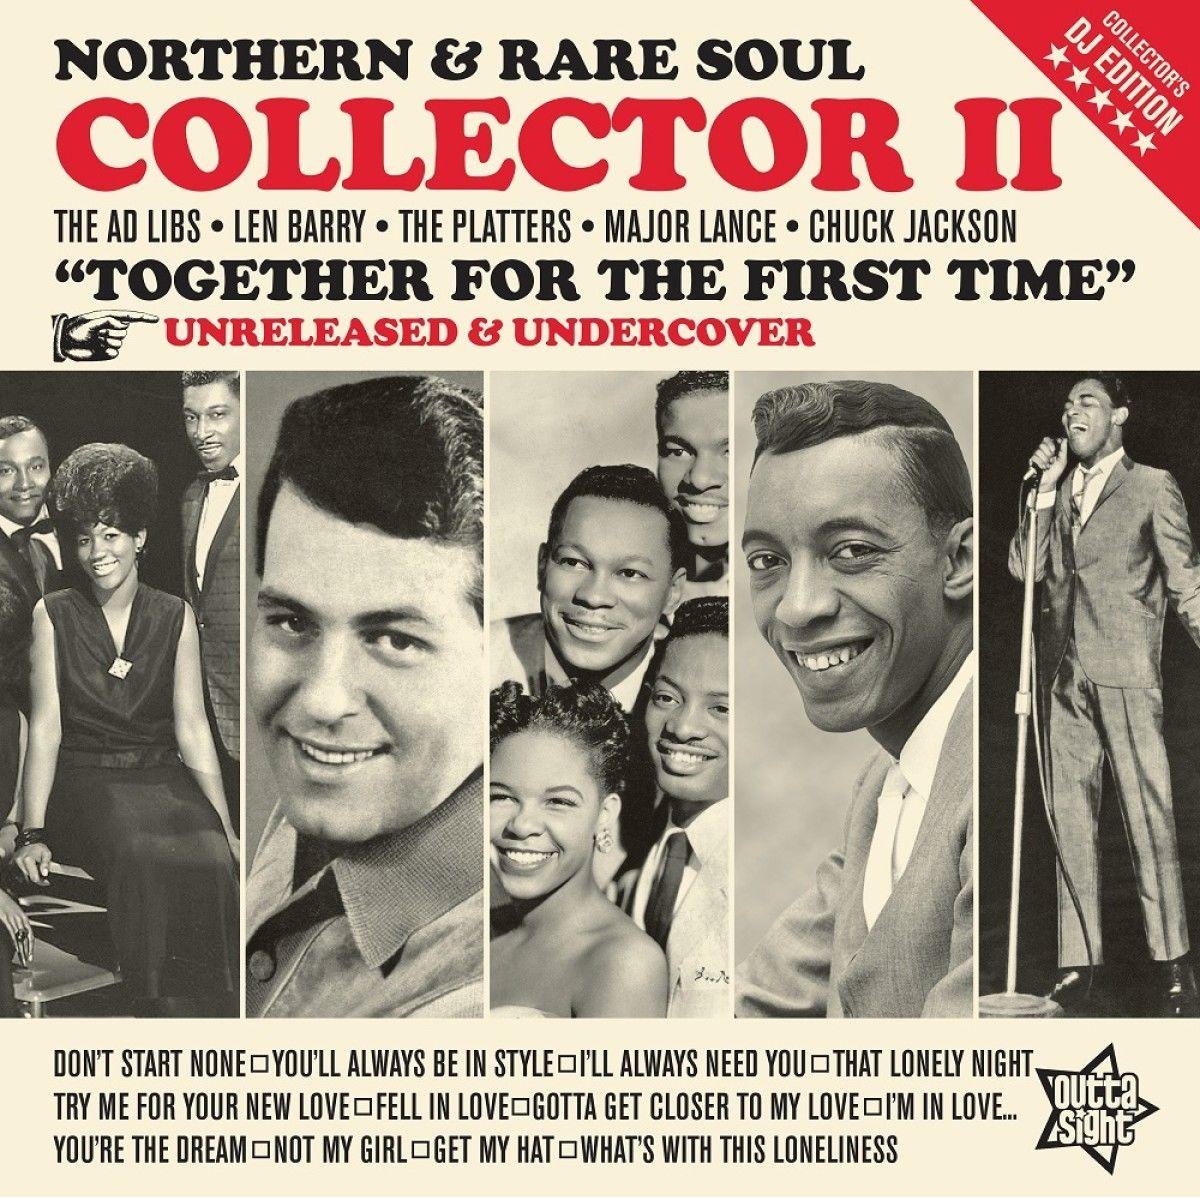 V/A - Northern & Rare Soul Collector 2 (2017) LP